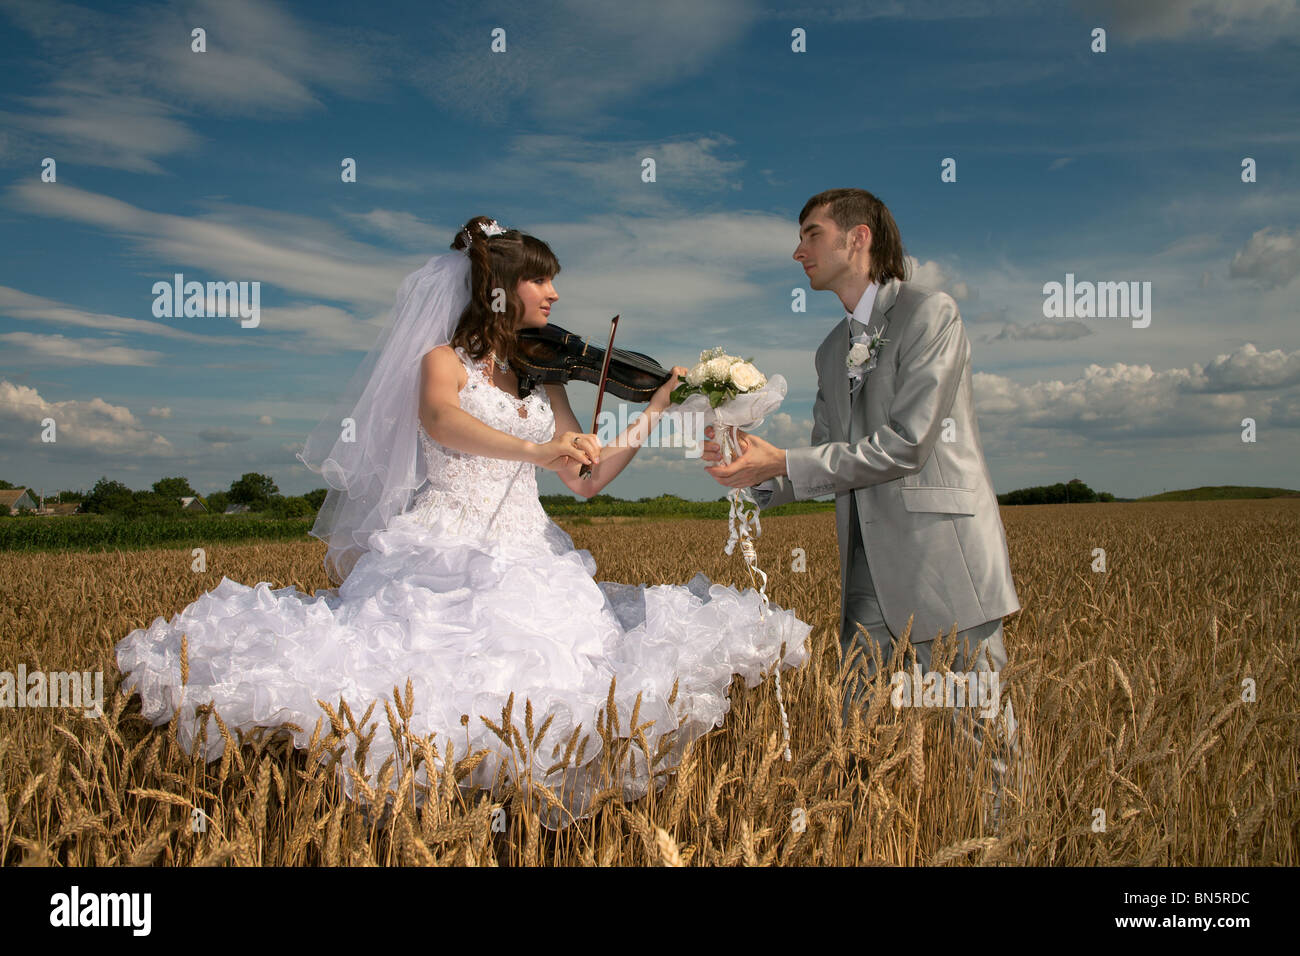 Romantic declaration of love under sounds of a violin Stock Photo